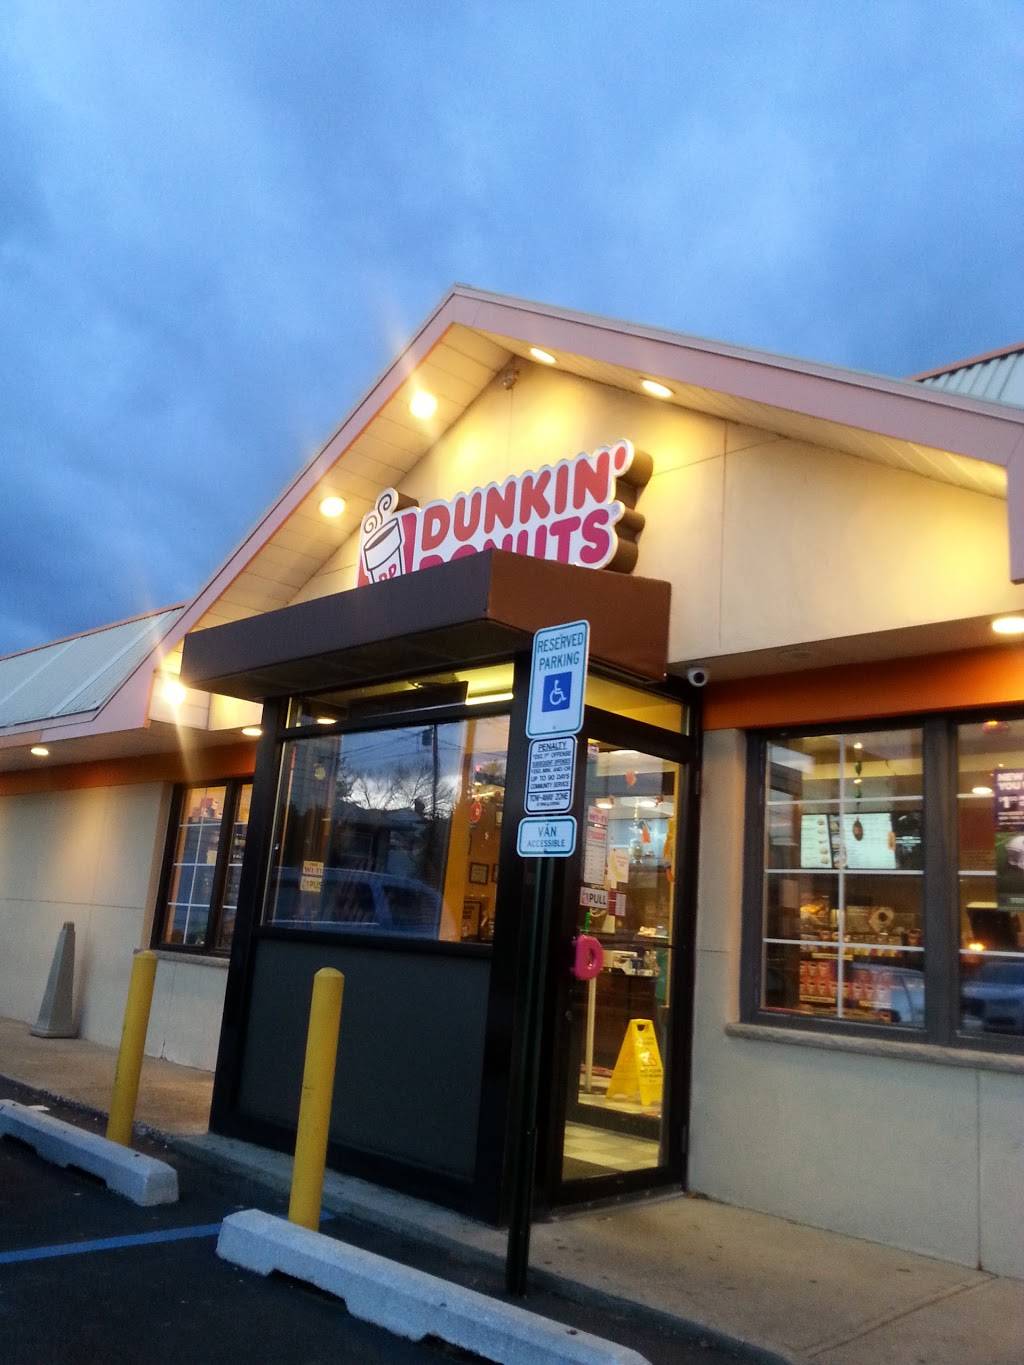 Dunkin Donuts | cafe | 435 Boulevard, Hasbrouck Heights, NJ 07604, USA | 2012034498 OR +1 201-203-4498